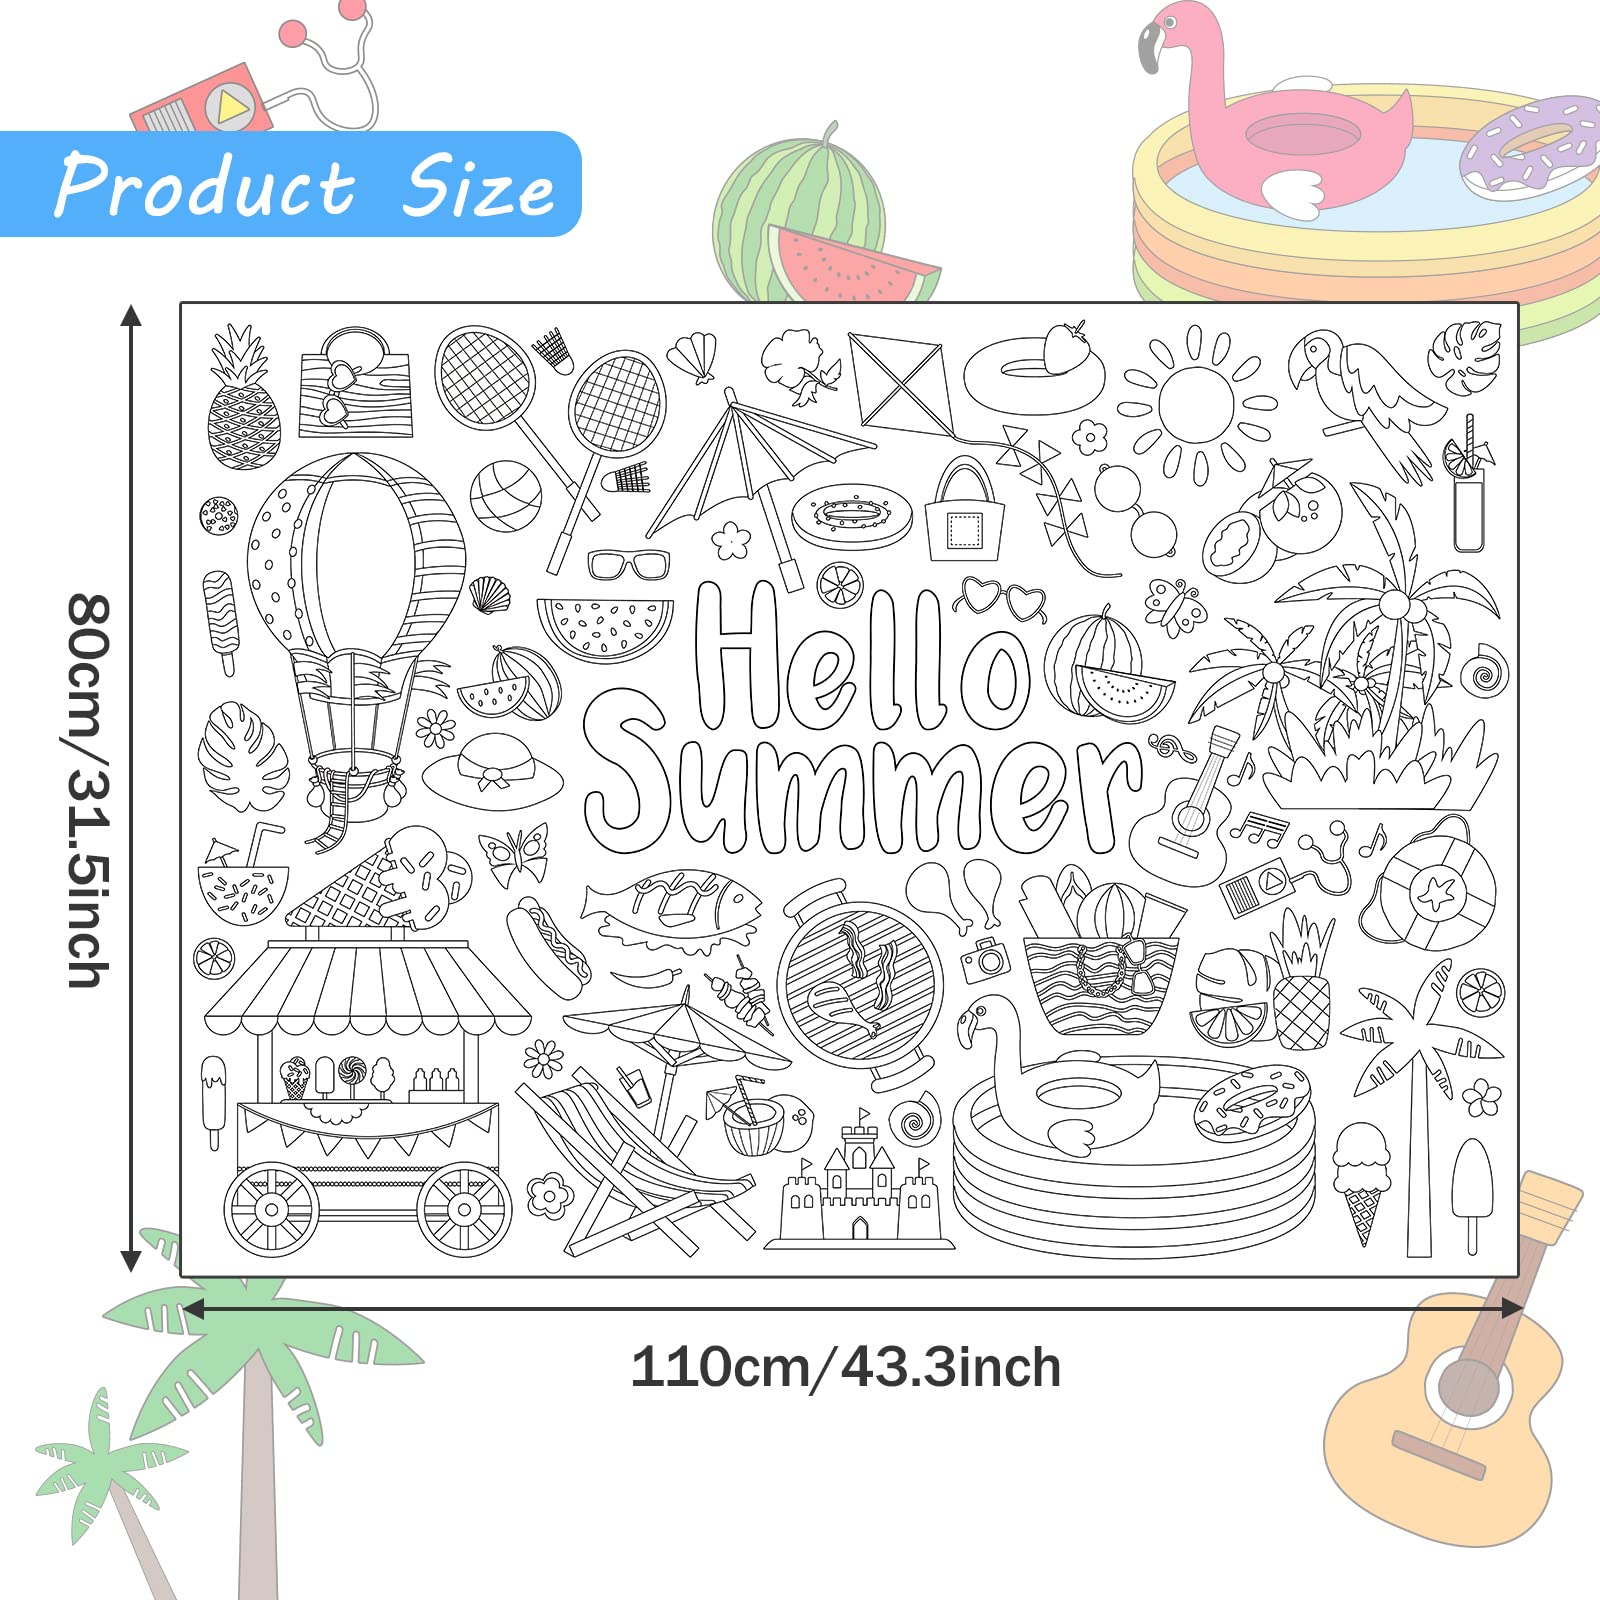 Zoiiwa hello summer coloring poster for kids giant coloring poster large summer coloring tablecloth jumbo coloring books for kids classroom home birthday party supplies favor x inch home